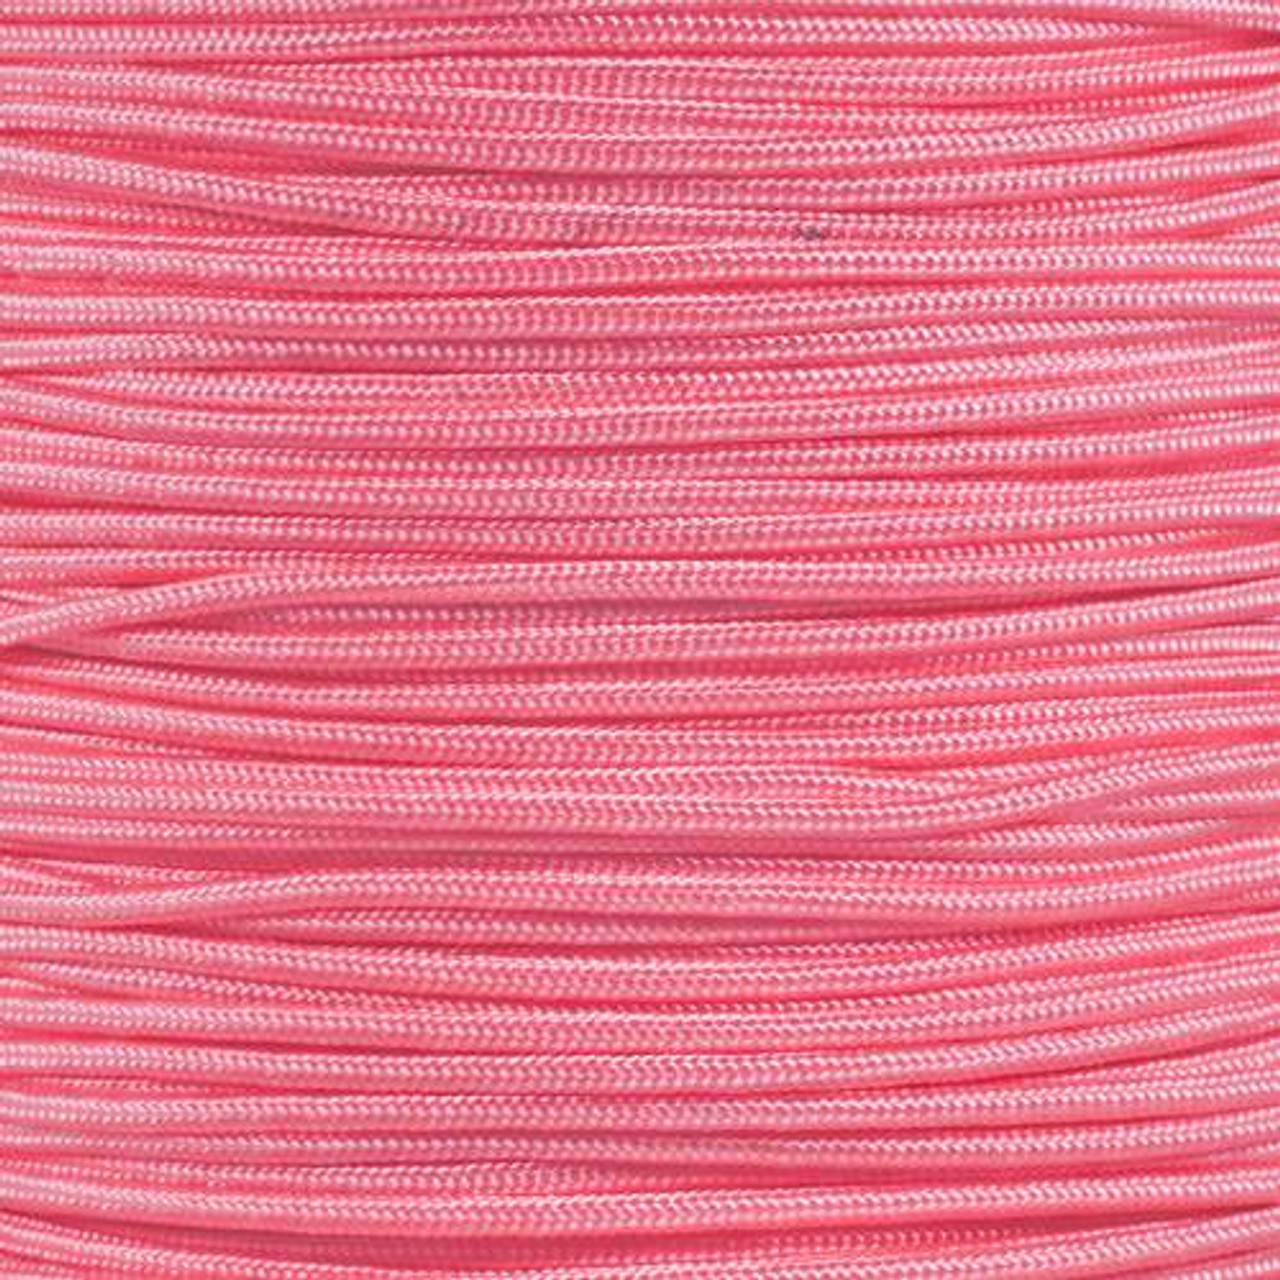 Rose Pink 275 5-Strand Tactical Cord